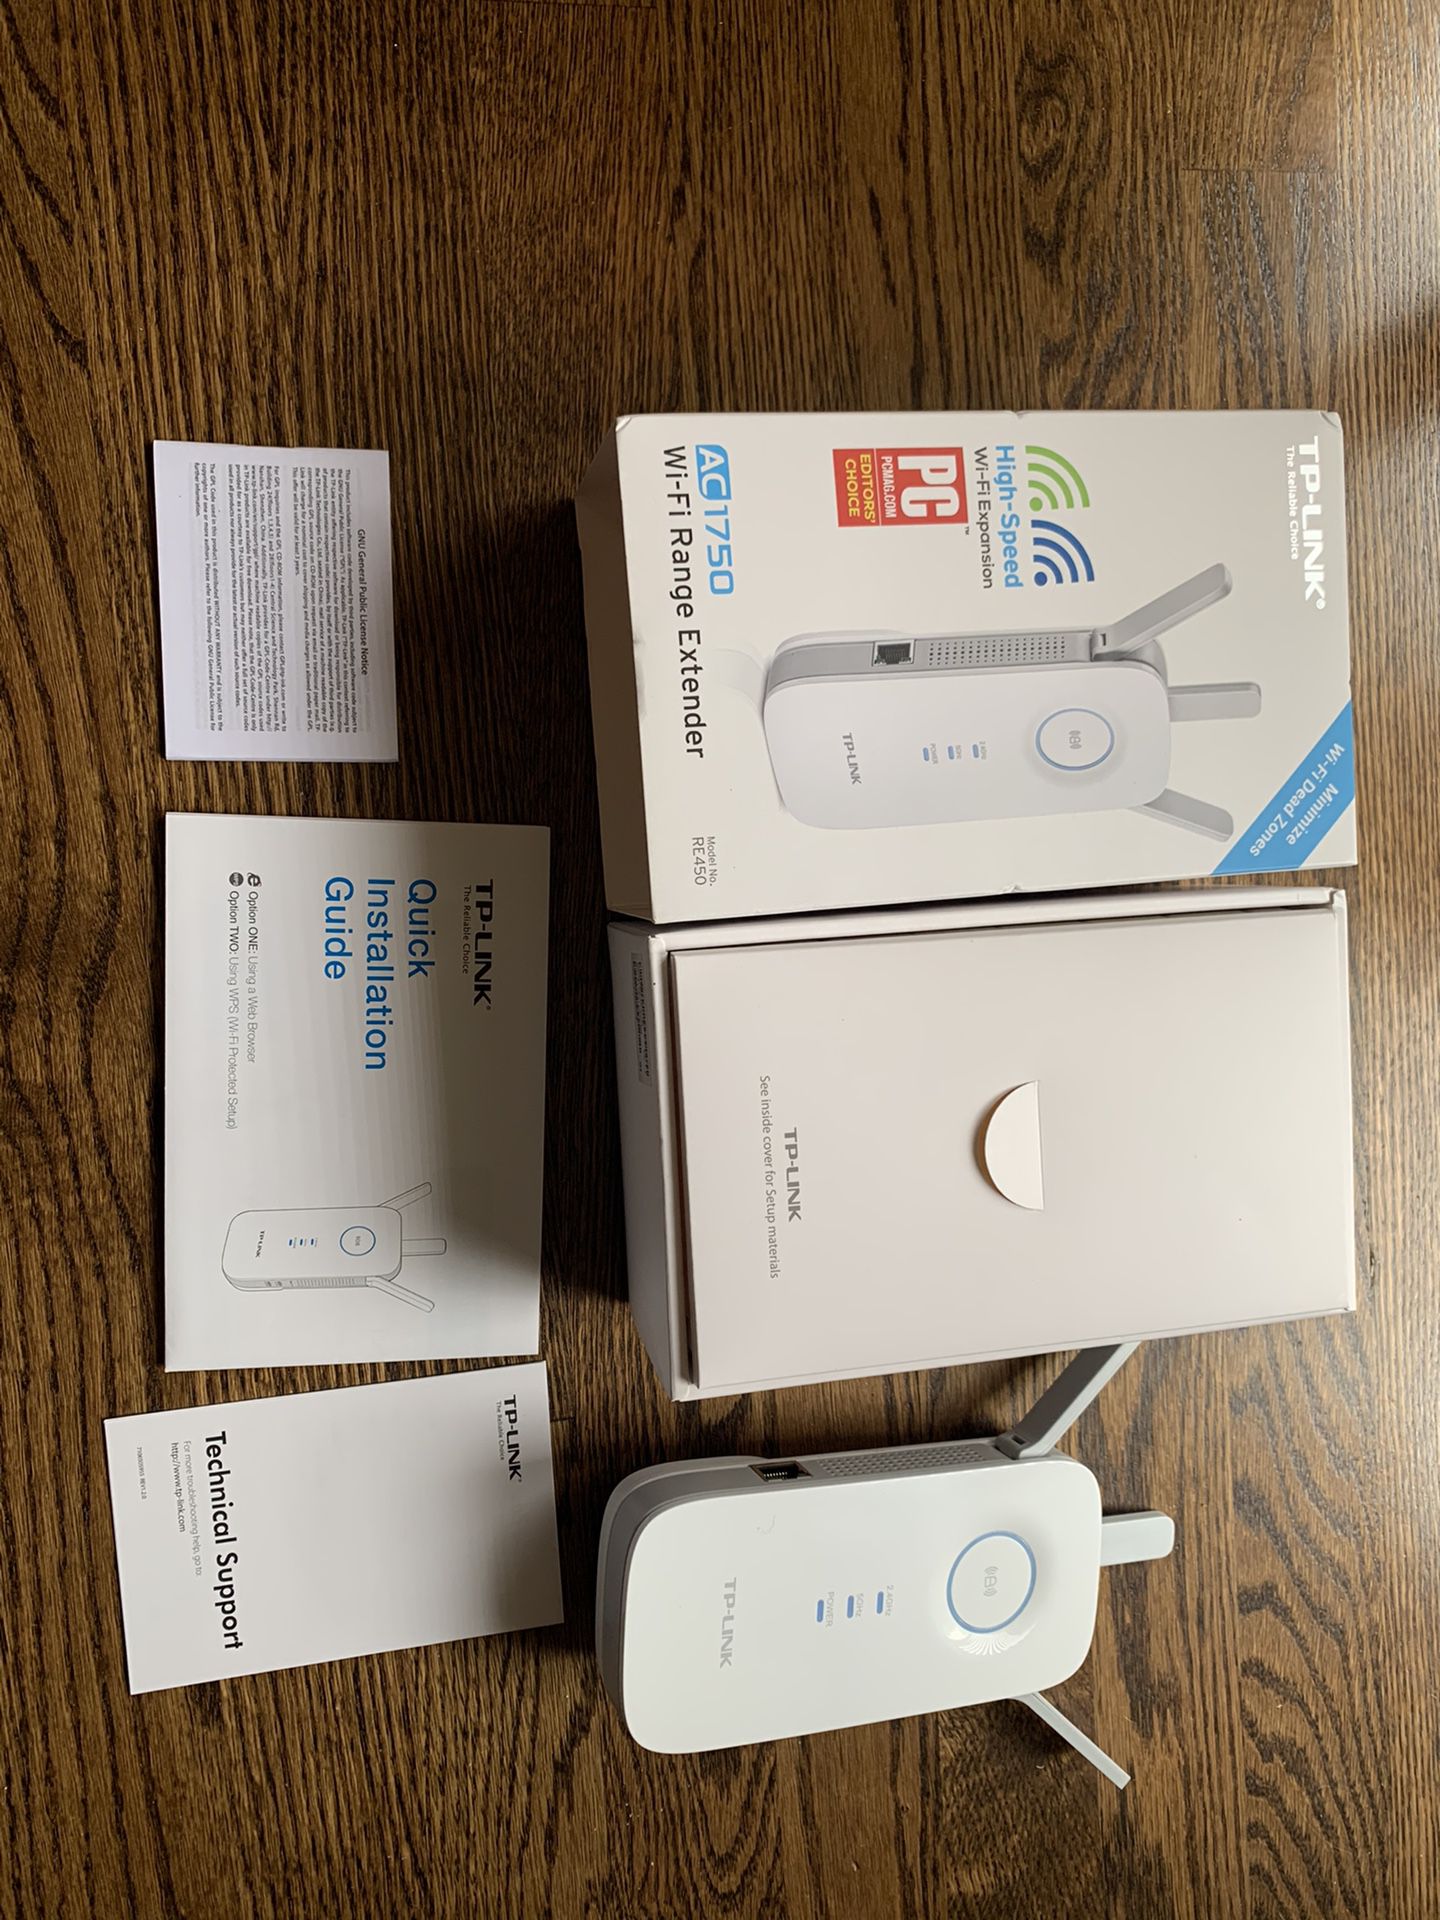 TP-Link AC1750 WiFi Range Extender with High Speed Mode (RE450)